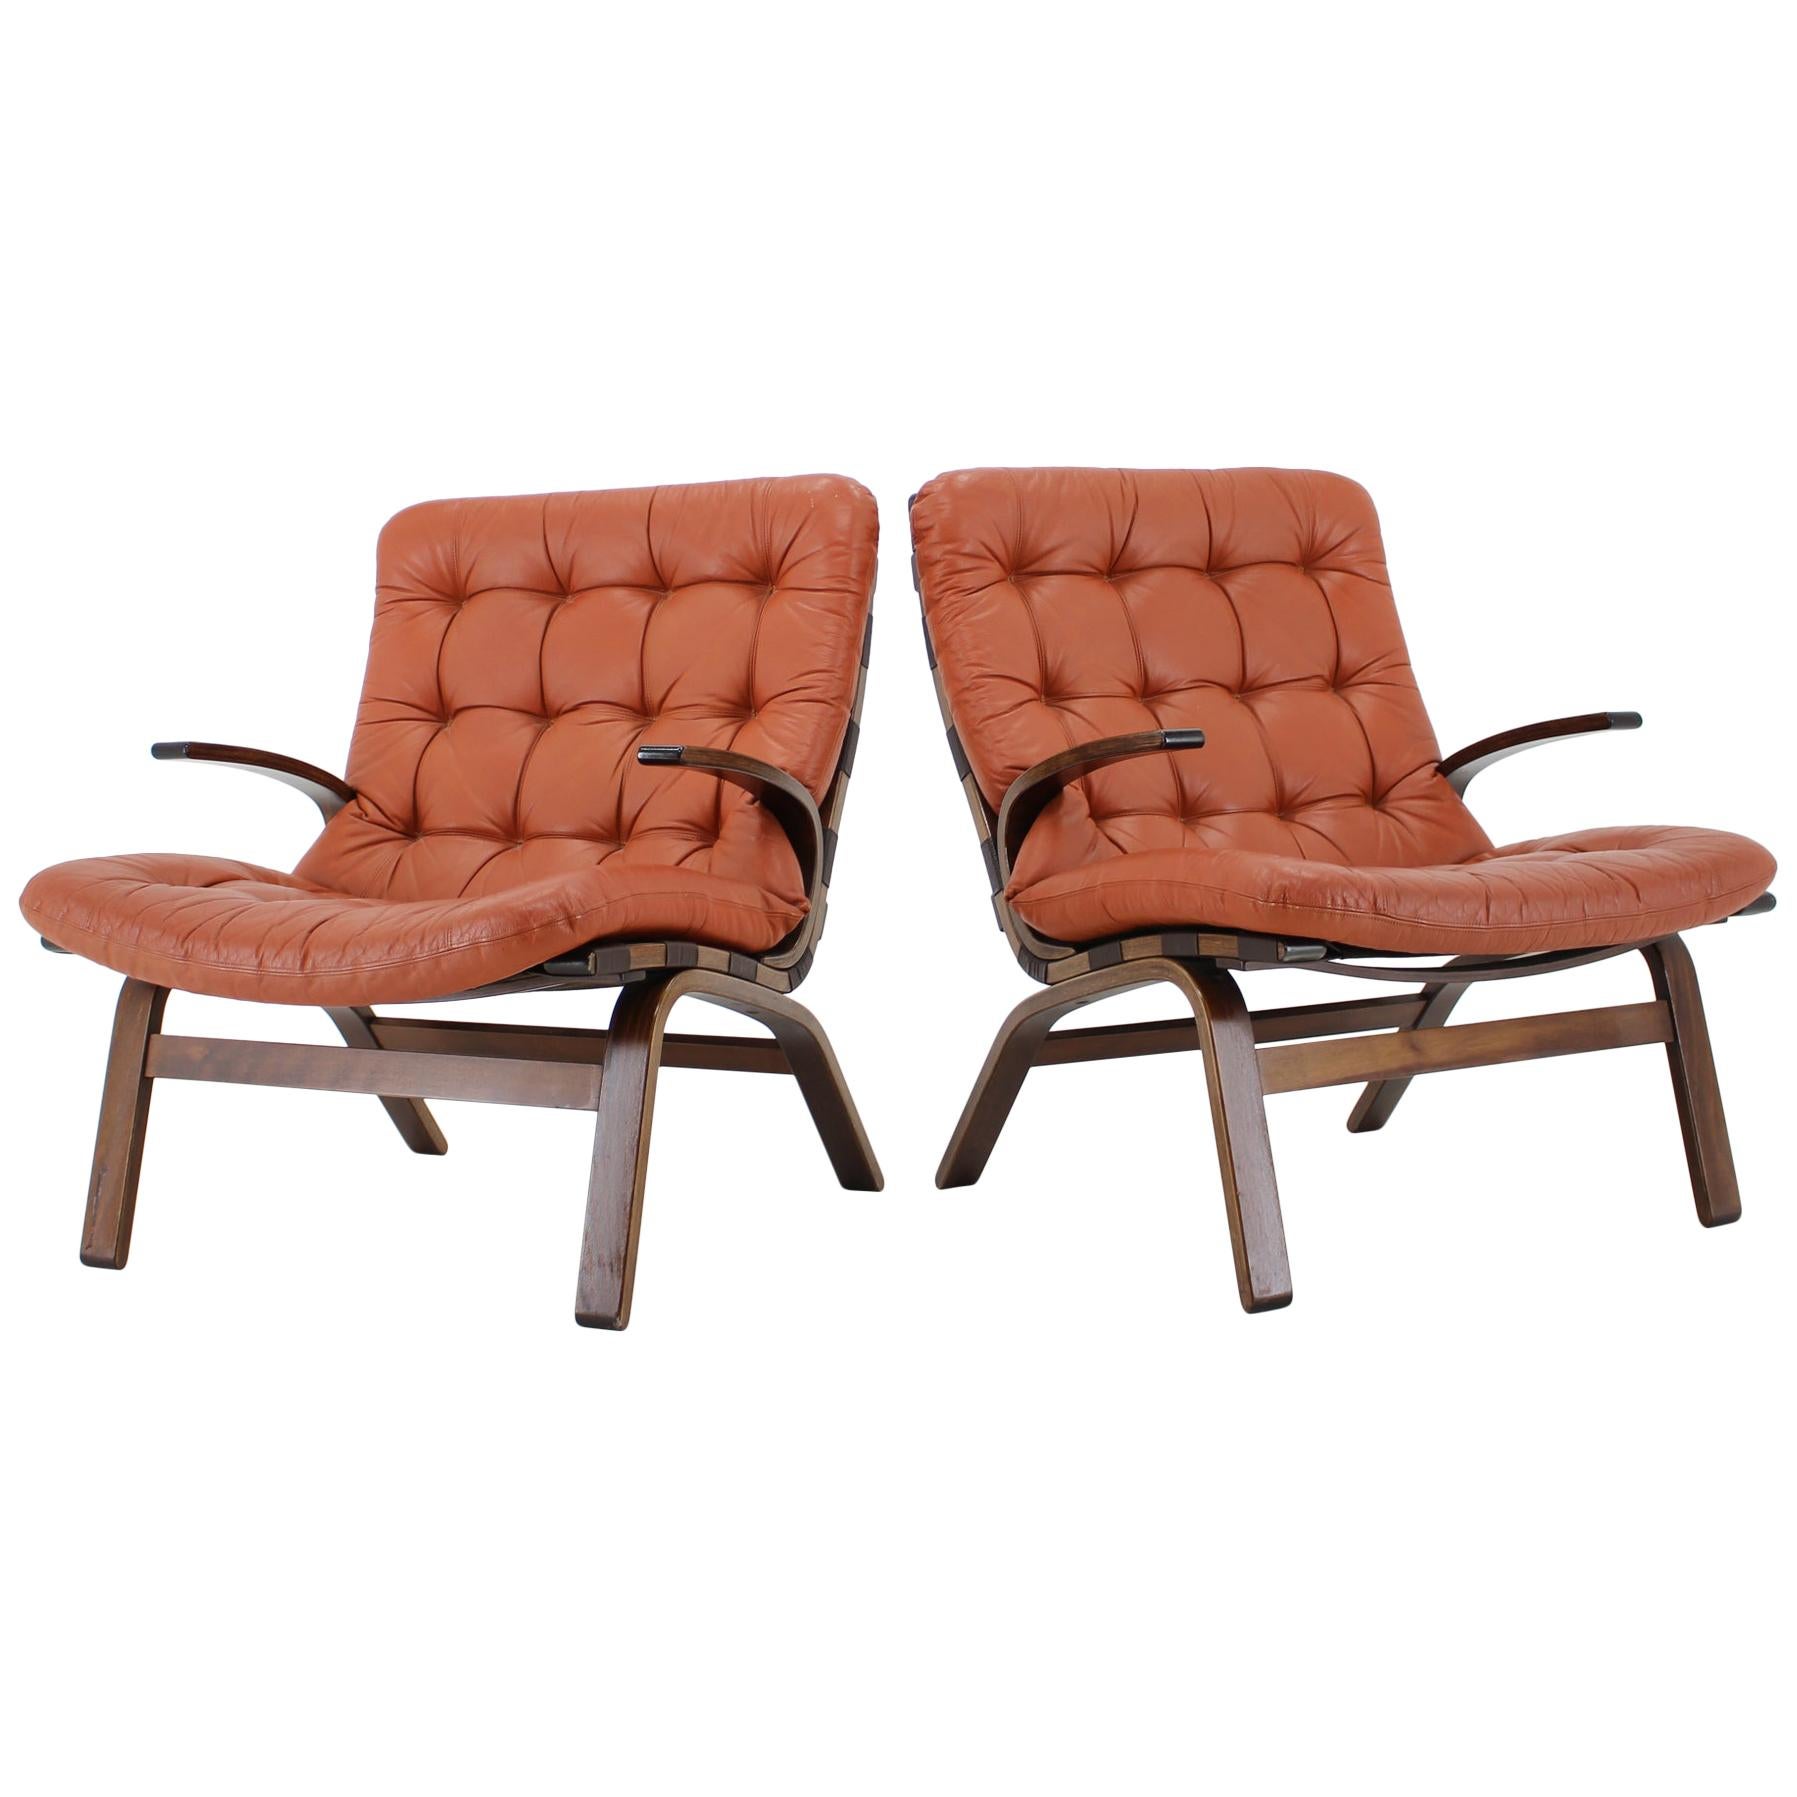 1970s Pair of Danish Bentwood Armchair in Red Leather